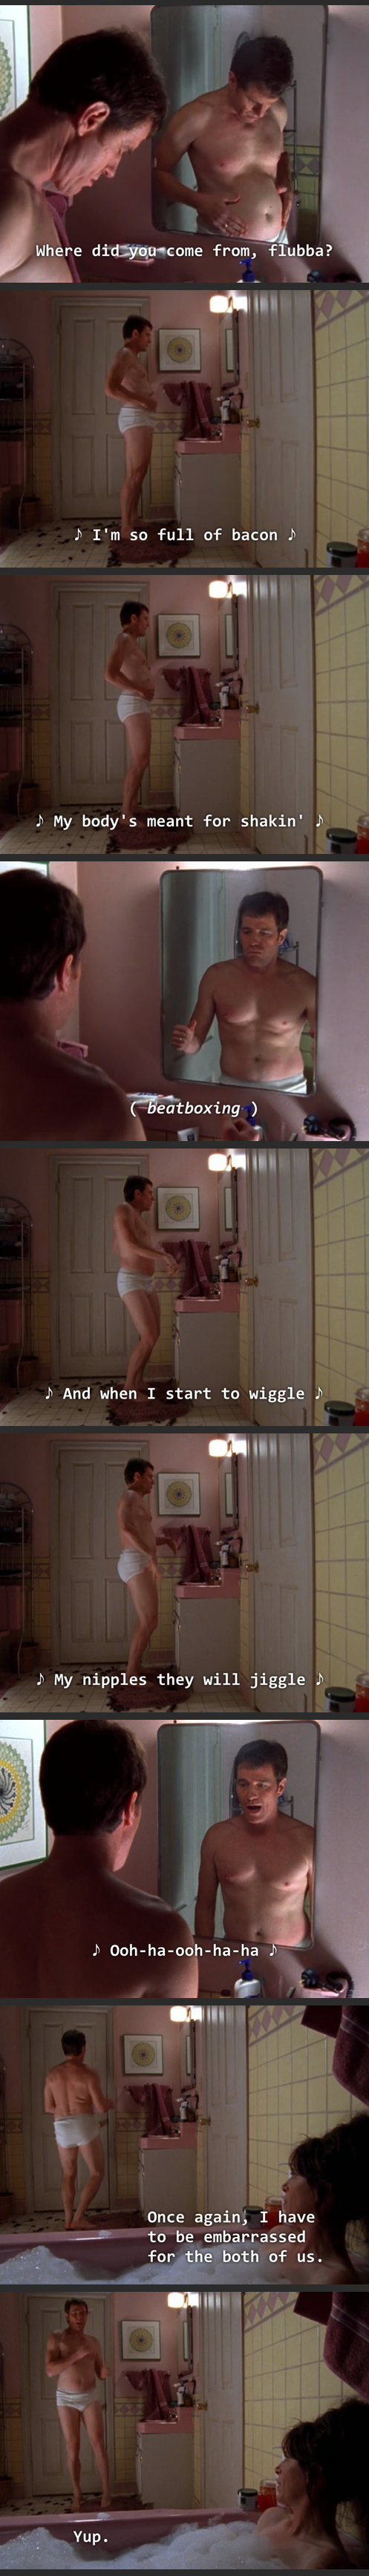 So full of bacon [Malcolm in the Middle]